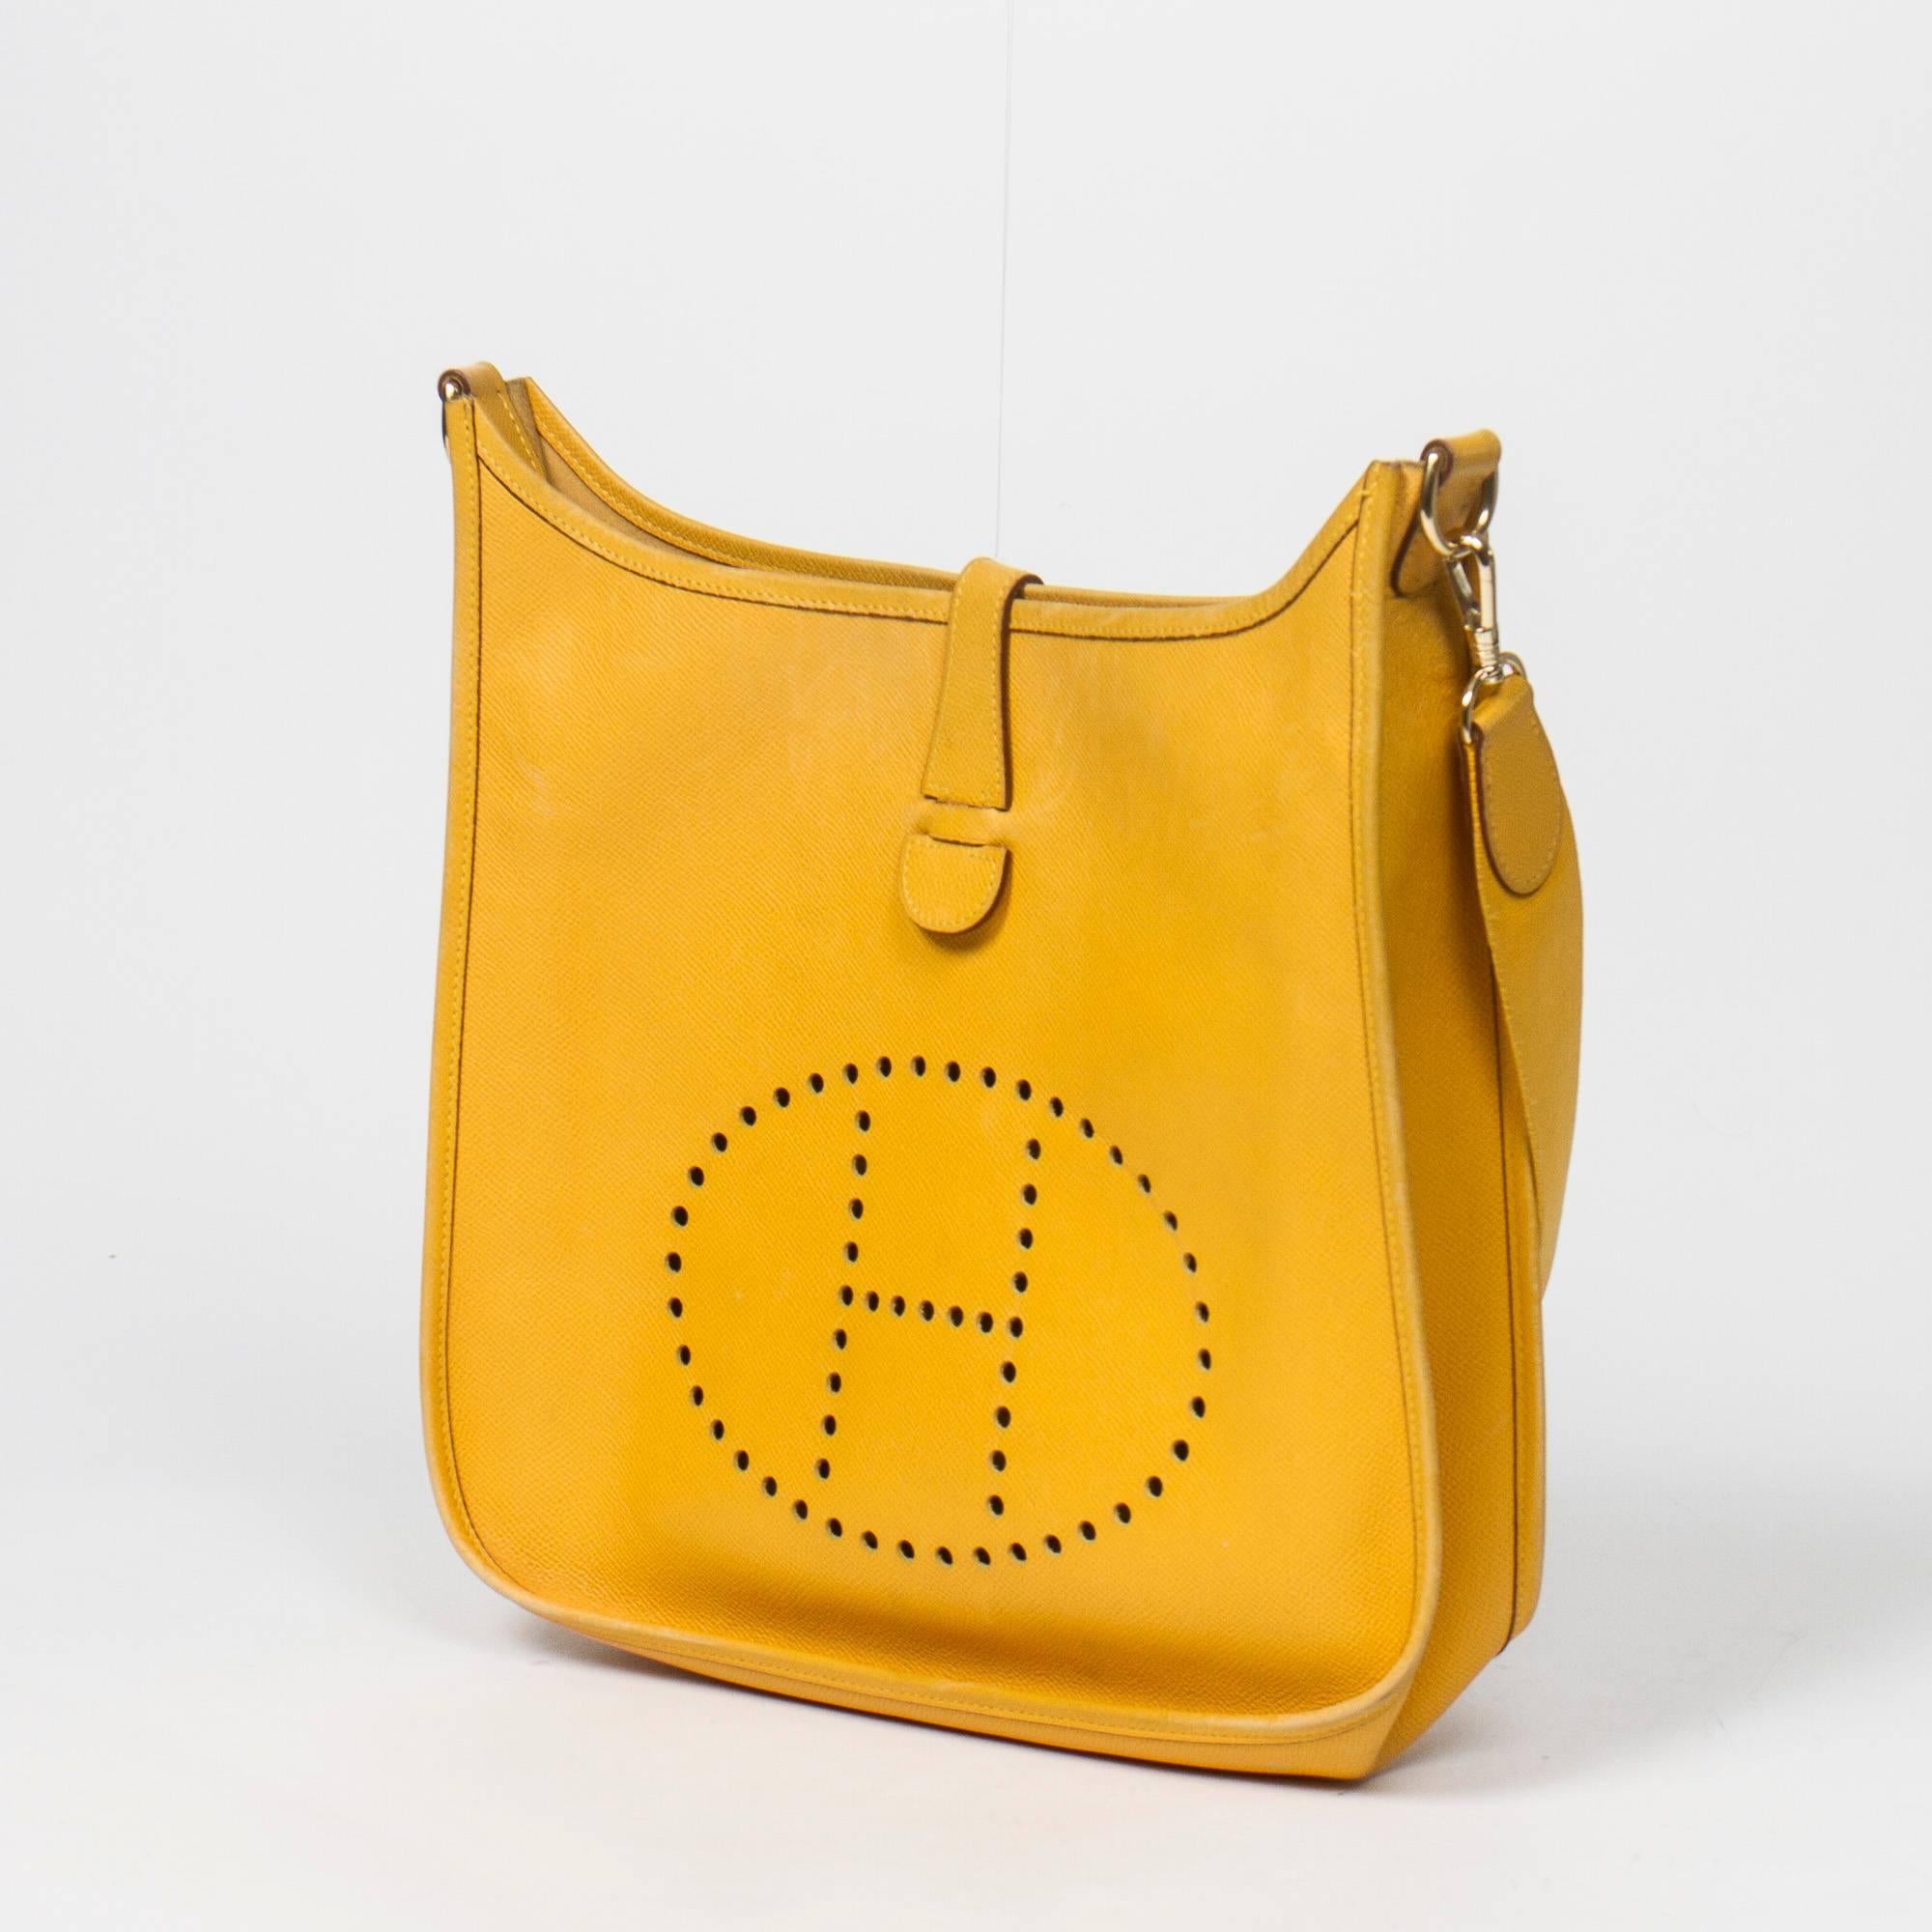 Hermès Evelyne GM in yellow Courchevel leather and gold tone hardware. Stamp A in a square. Model from 1997. Very slight marks on the leather of the bag, some scratches on the hardware. Dustbag included. Excellent condition overall